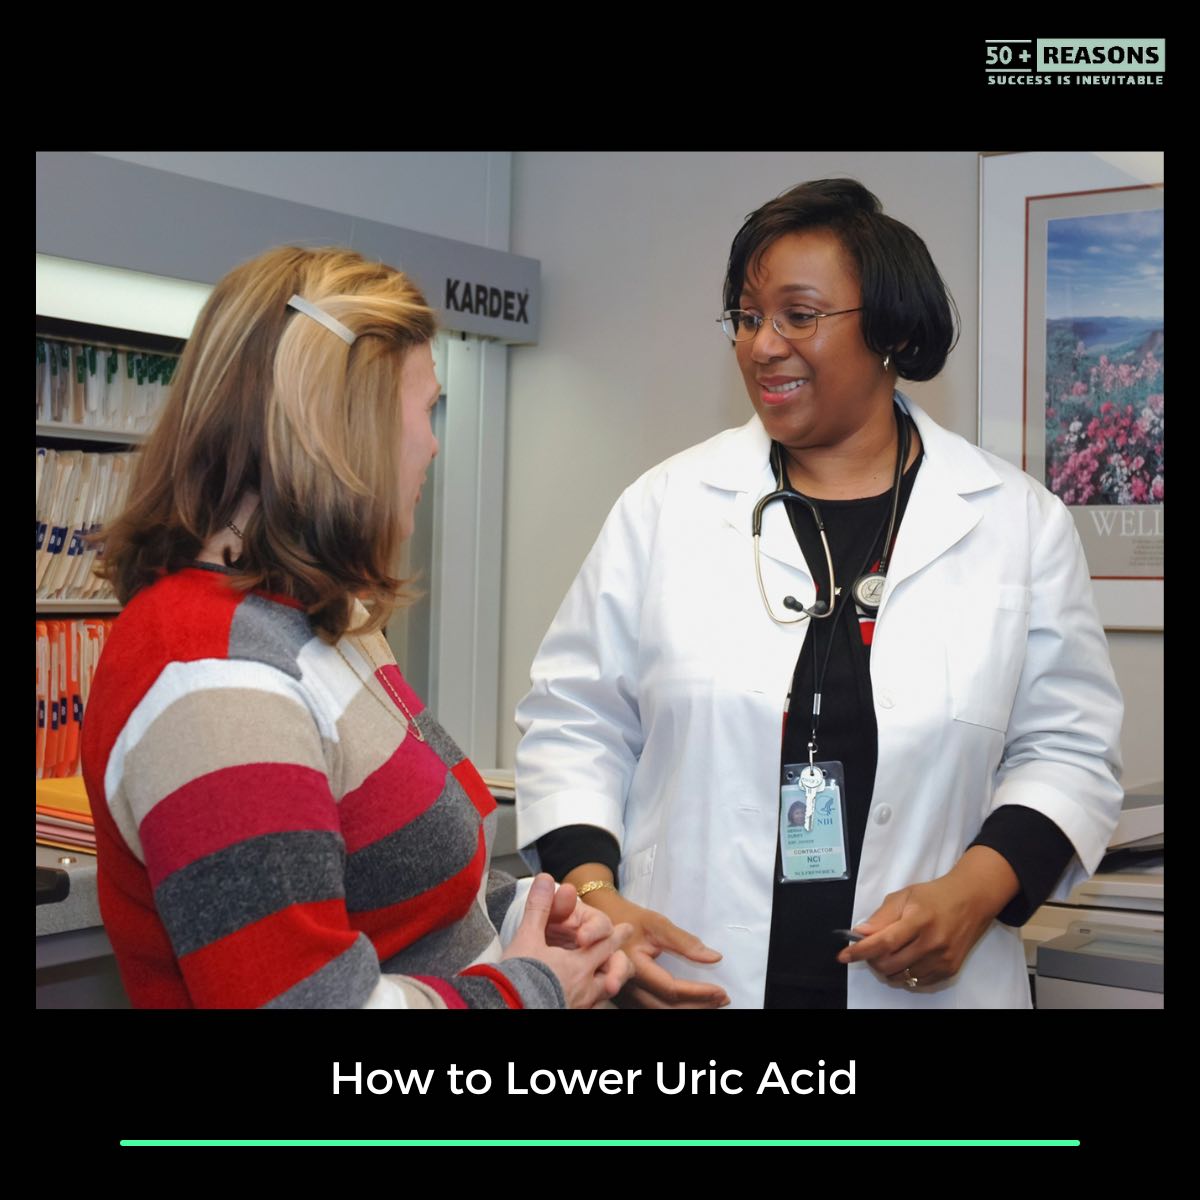 How to Lower Uric Acid